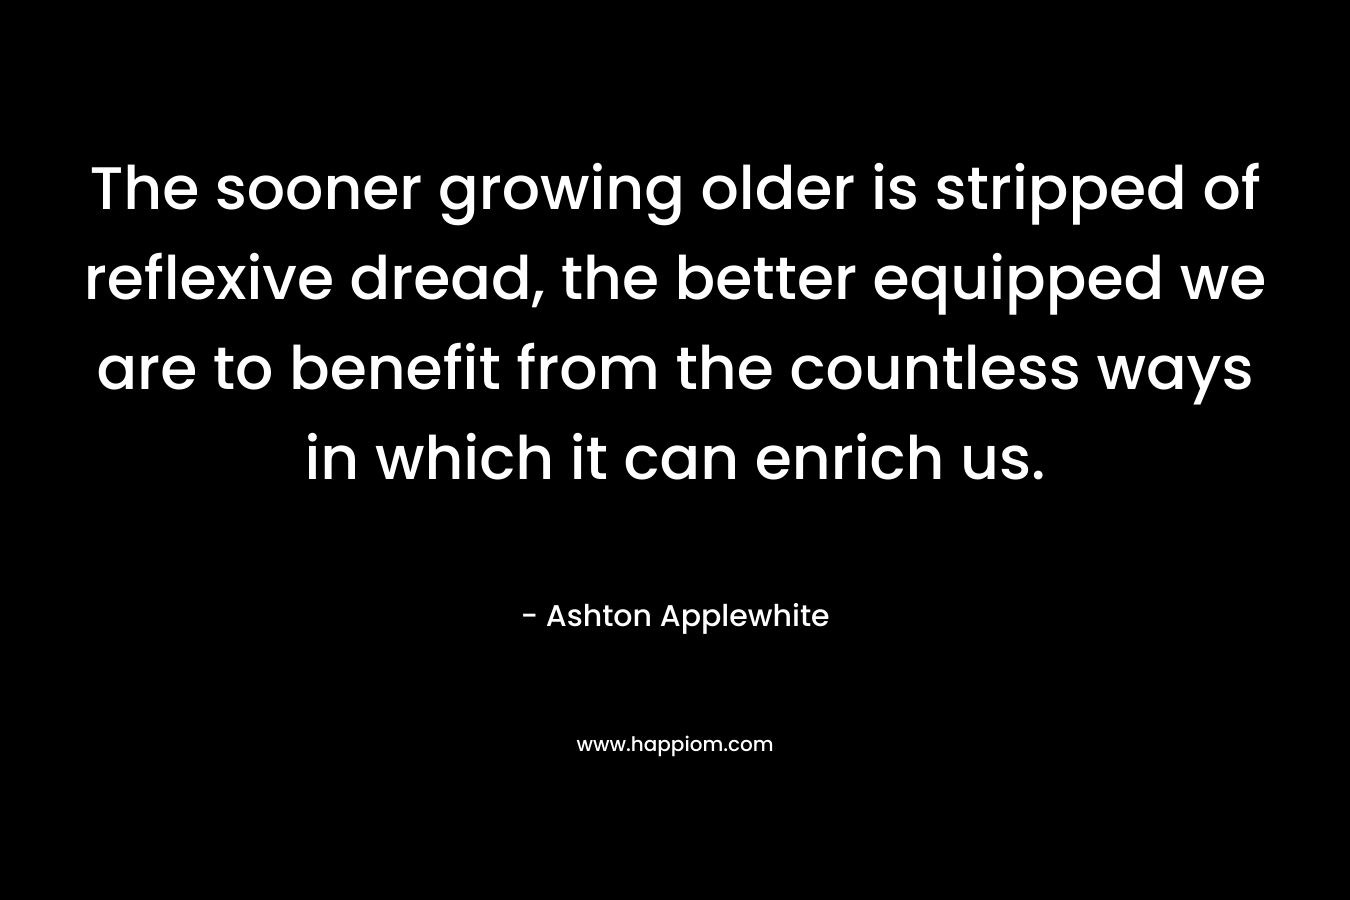 The sooner growing older is stripped of reflexive dread, the better equipped we are to benefit from the countless ways in which it can enrich us. – Ashton Applewhite